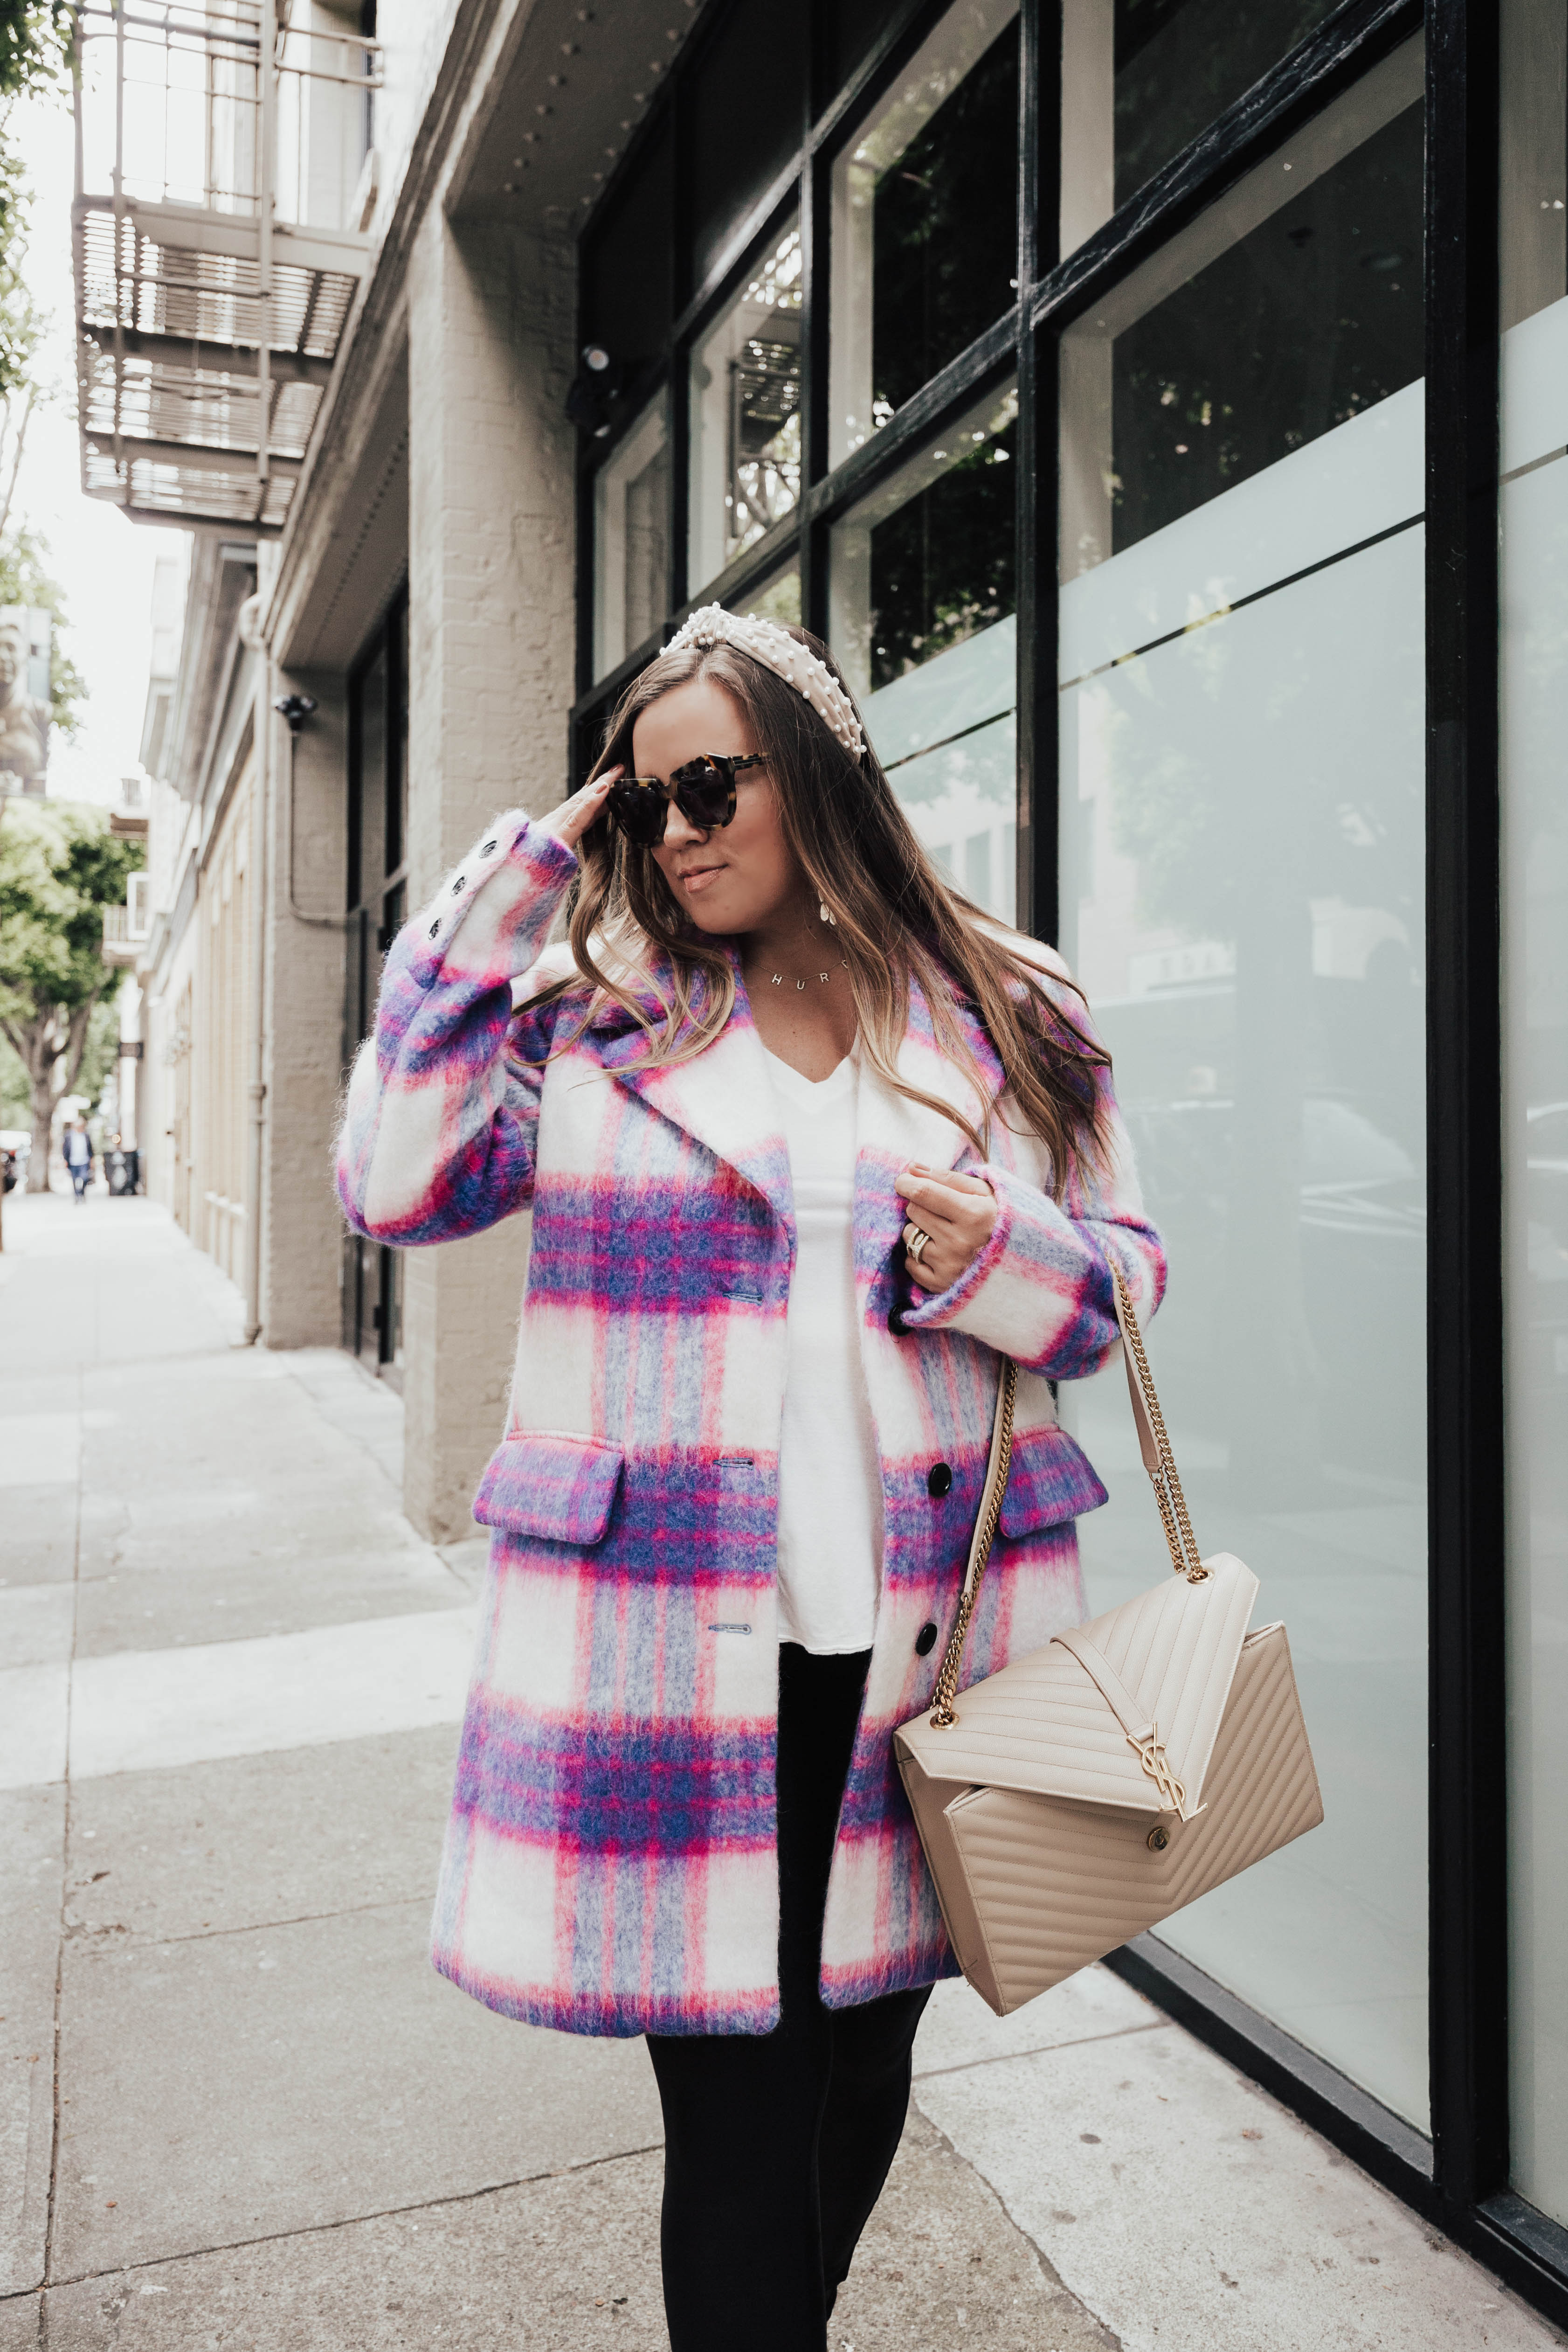 Ashley's June Amazon Favorites 2019. San Francisco blogger, Ashley Zeal shares her June Amazon favorites. Check out all her best purchases from last month.